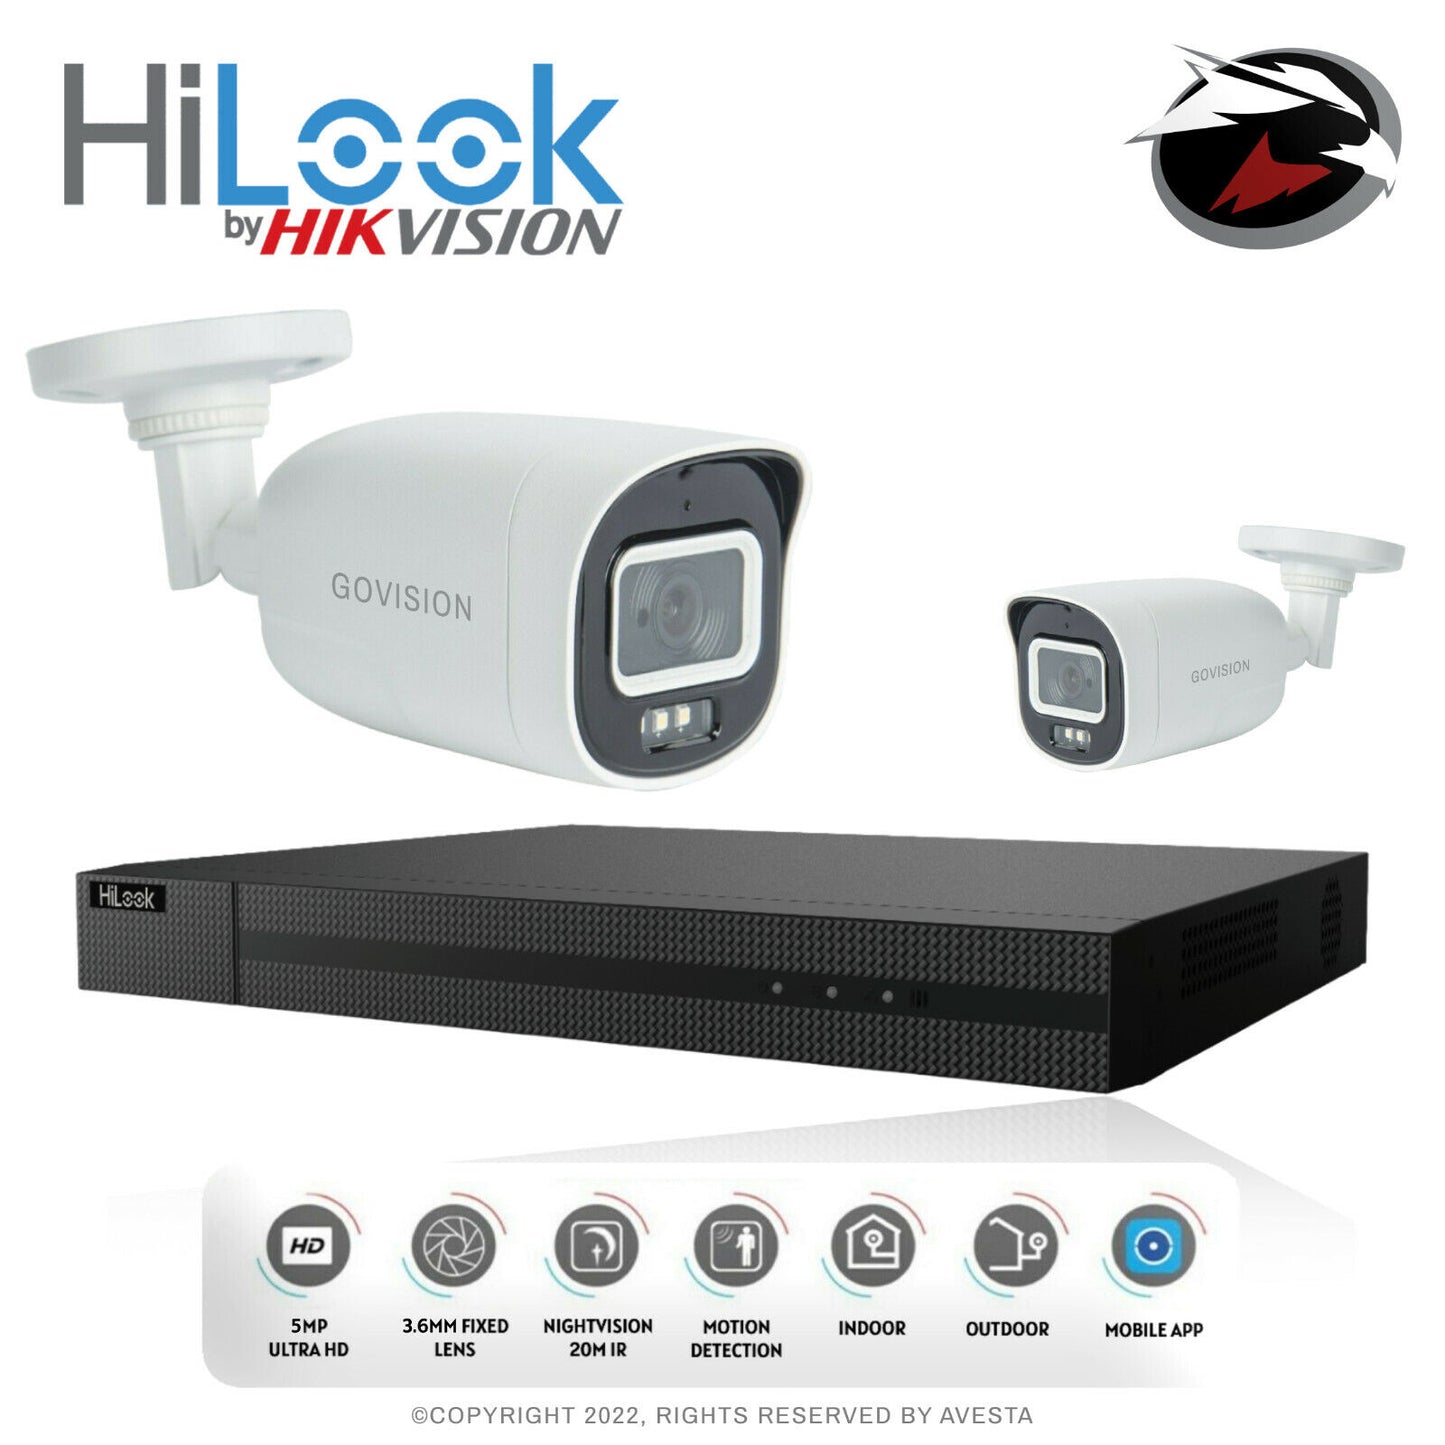 HIKVISION HILOOK 5MP CCTV SYSTEM DVR UHD 24/7 HOURS COLORFUL NIGHTVISION CAMERA 4CH DVR 2xCameras (white) 1TB HDD